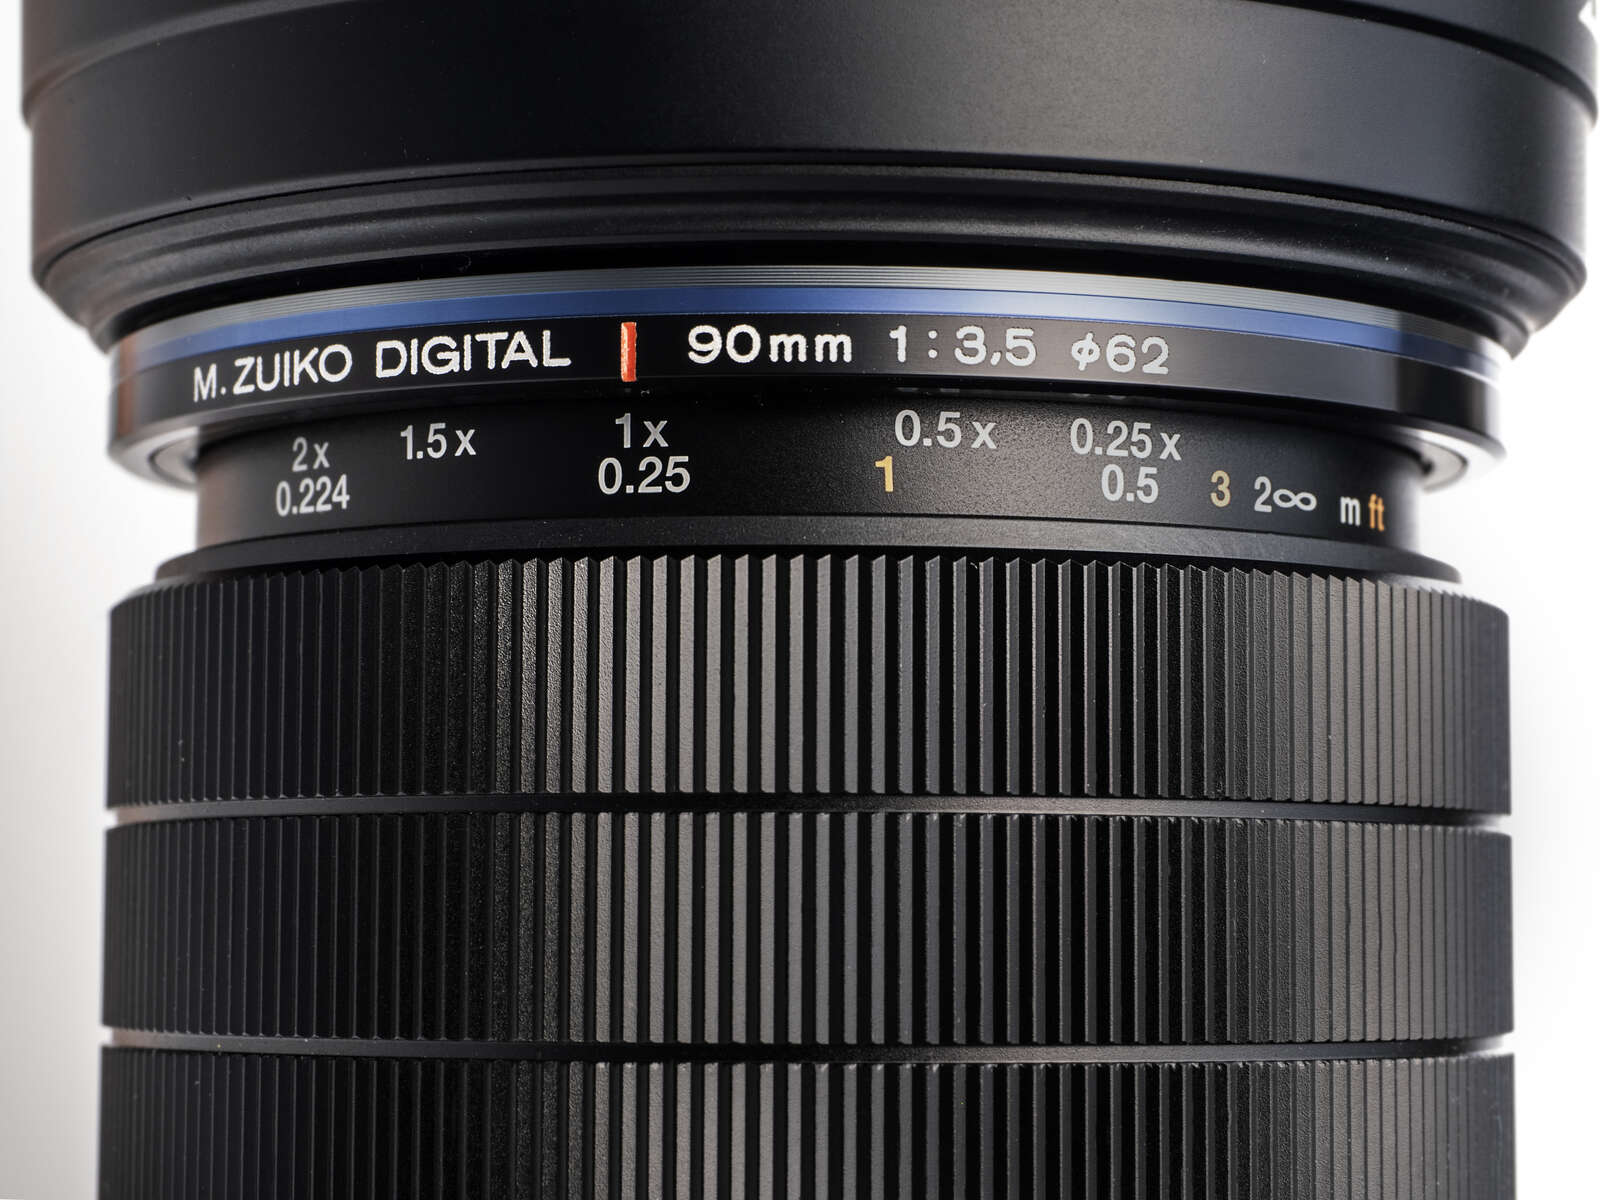 First Impression of Macro 90mm OM | the PRO F3.5 IS ED M.Zuiko SYSTEM